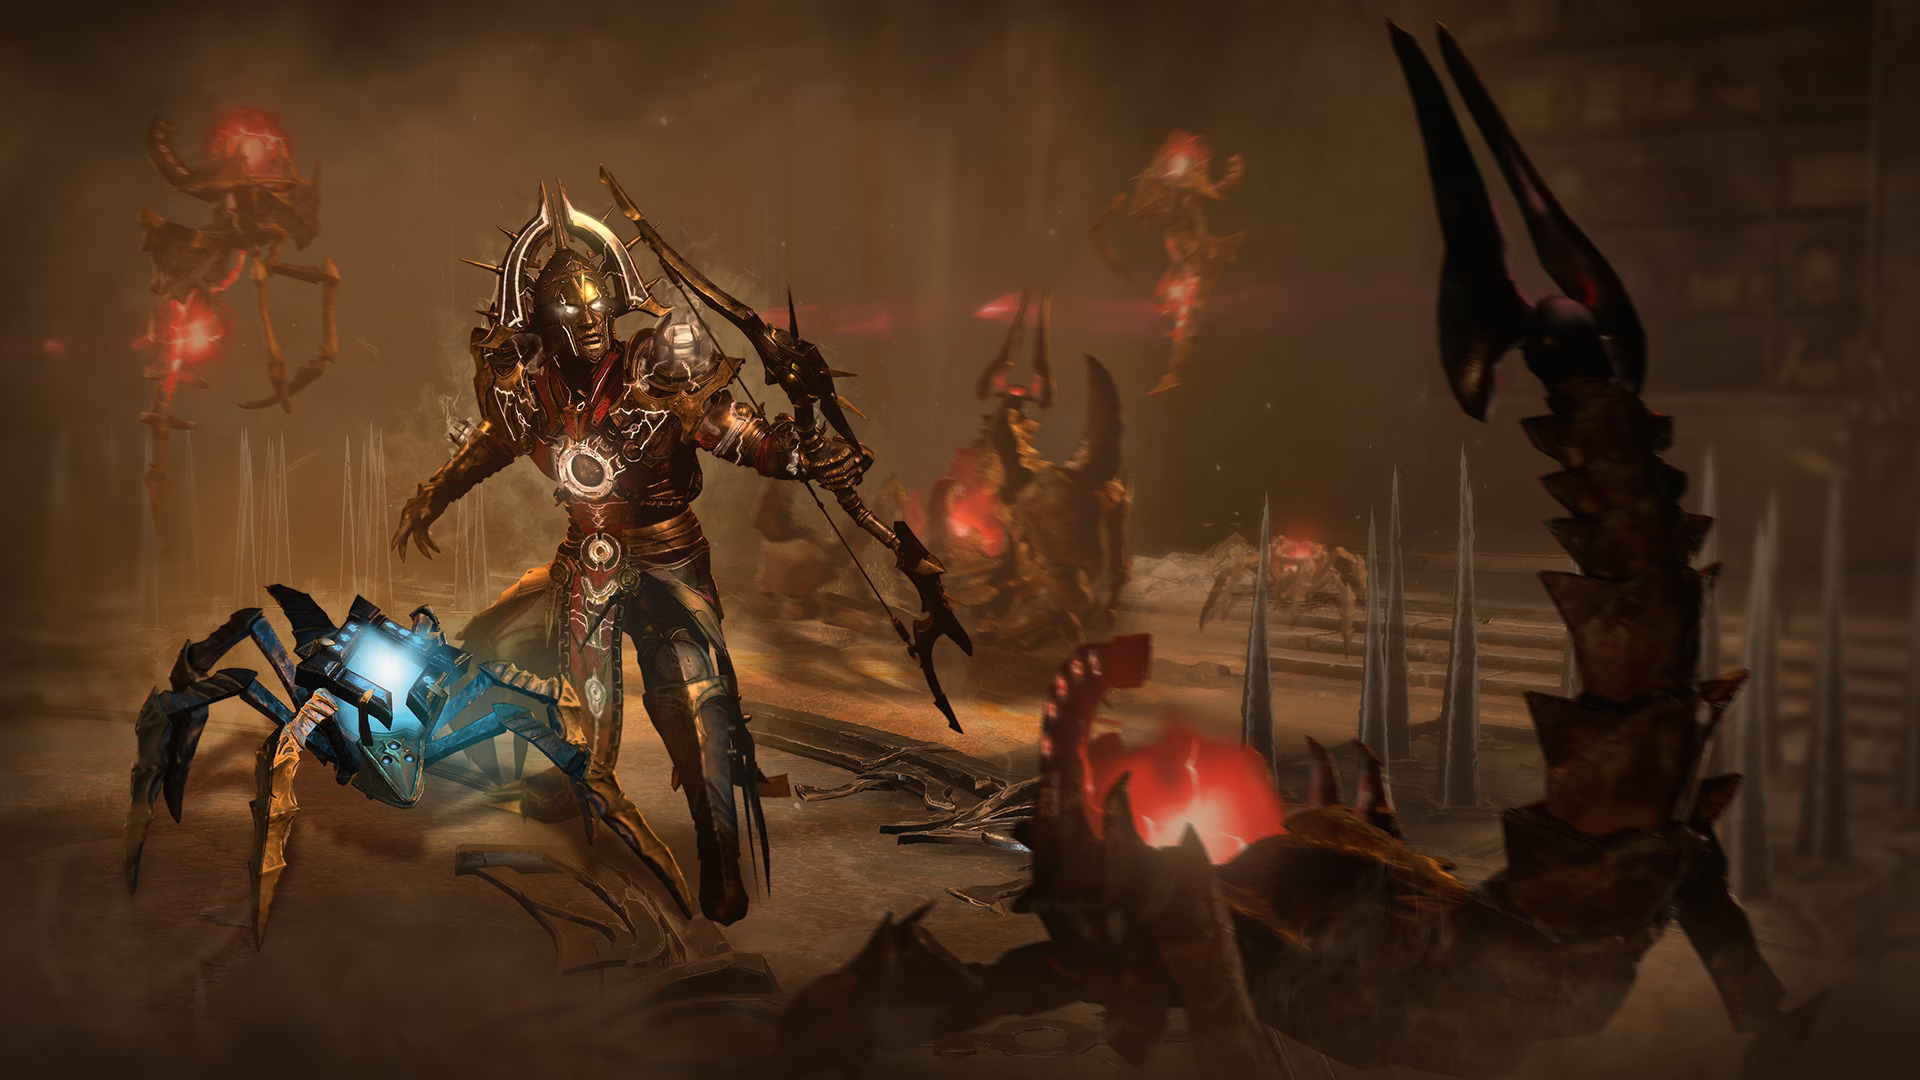 A player takes on some robot enemies in Diablo 4 Season of the Construct